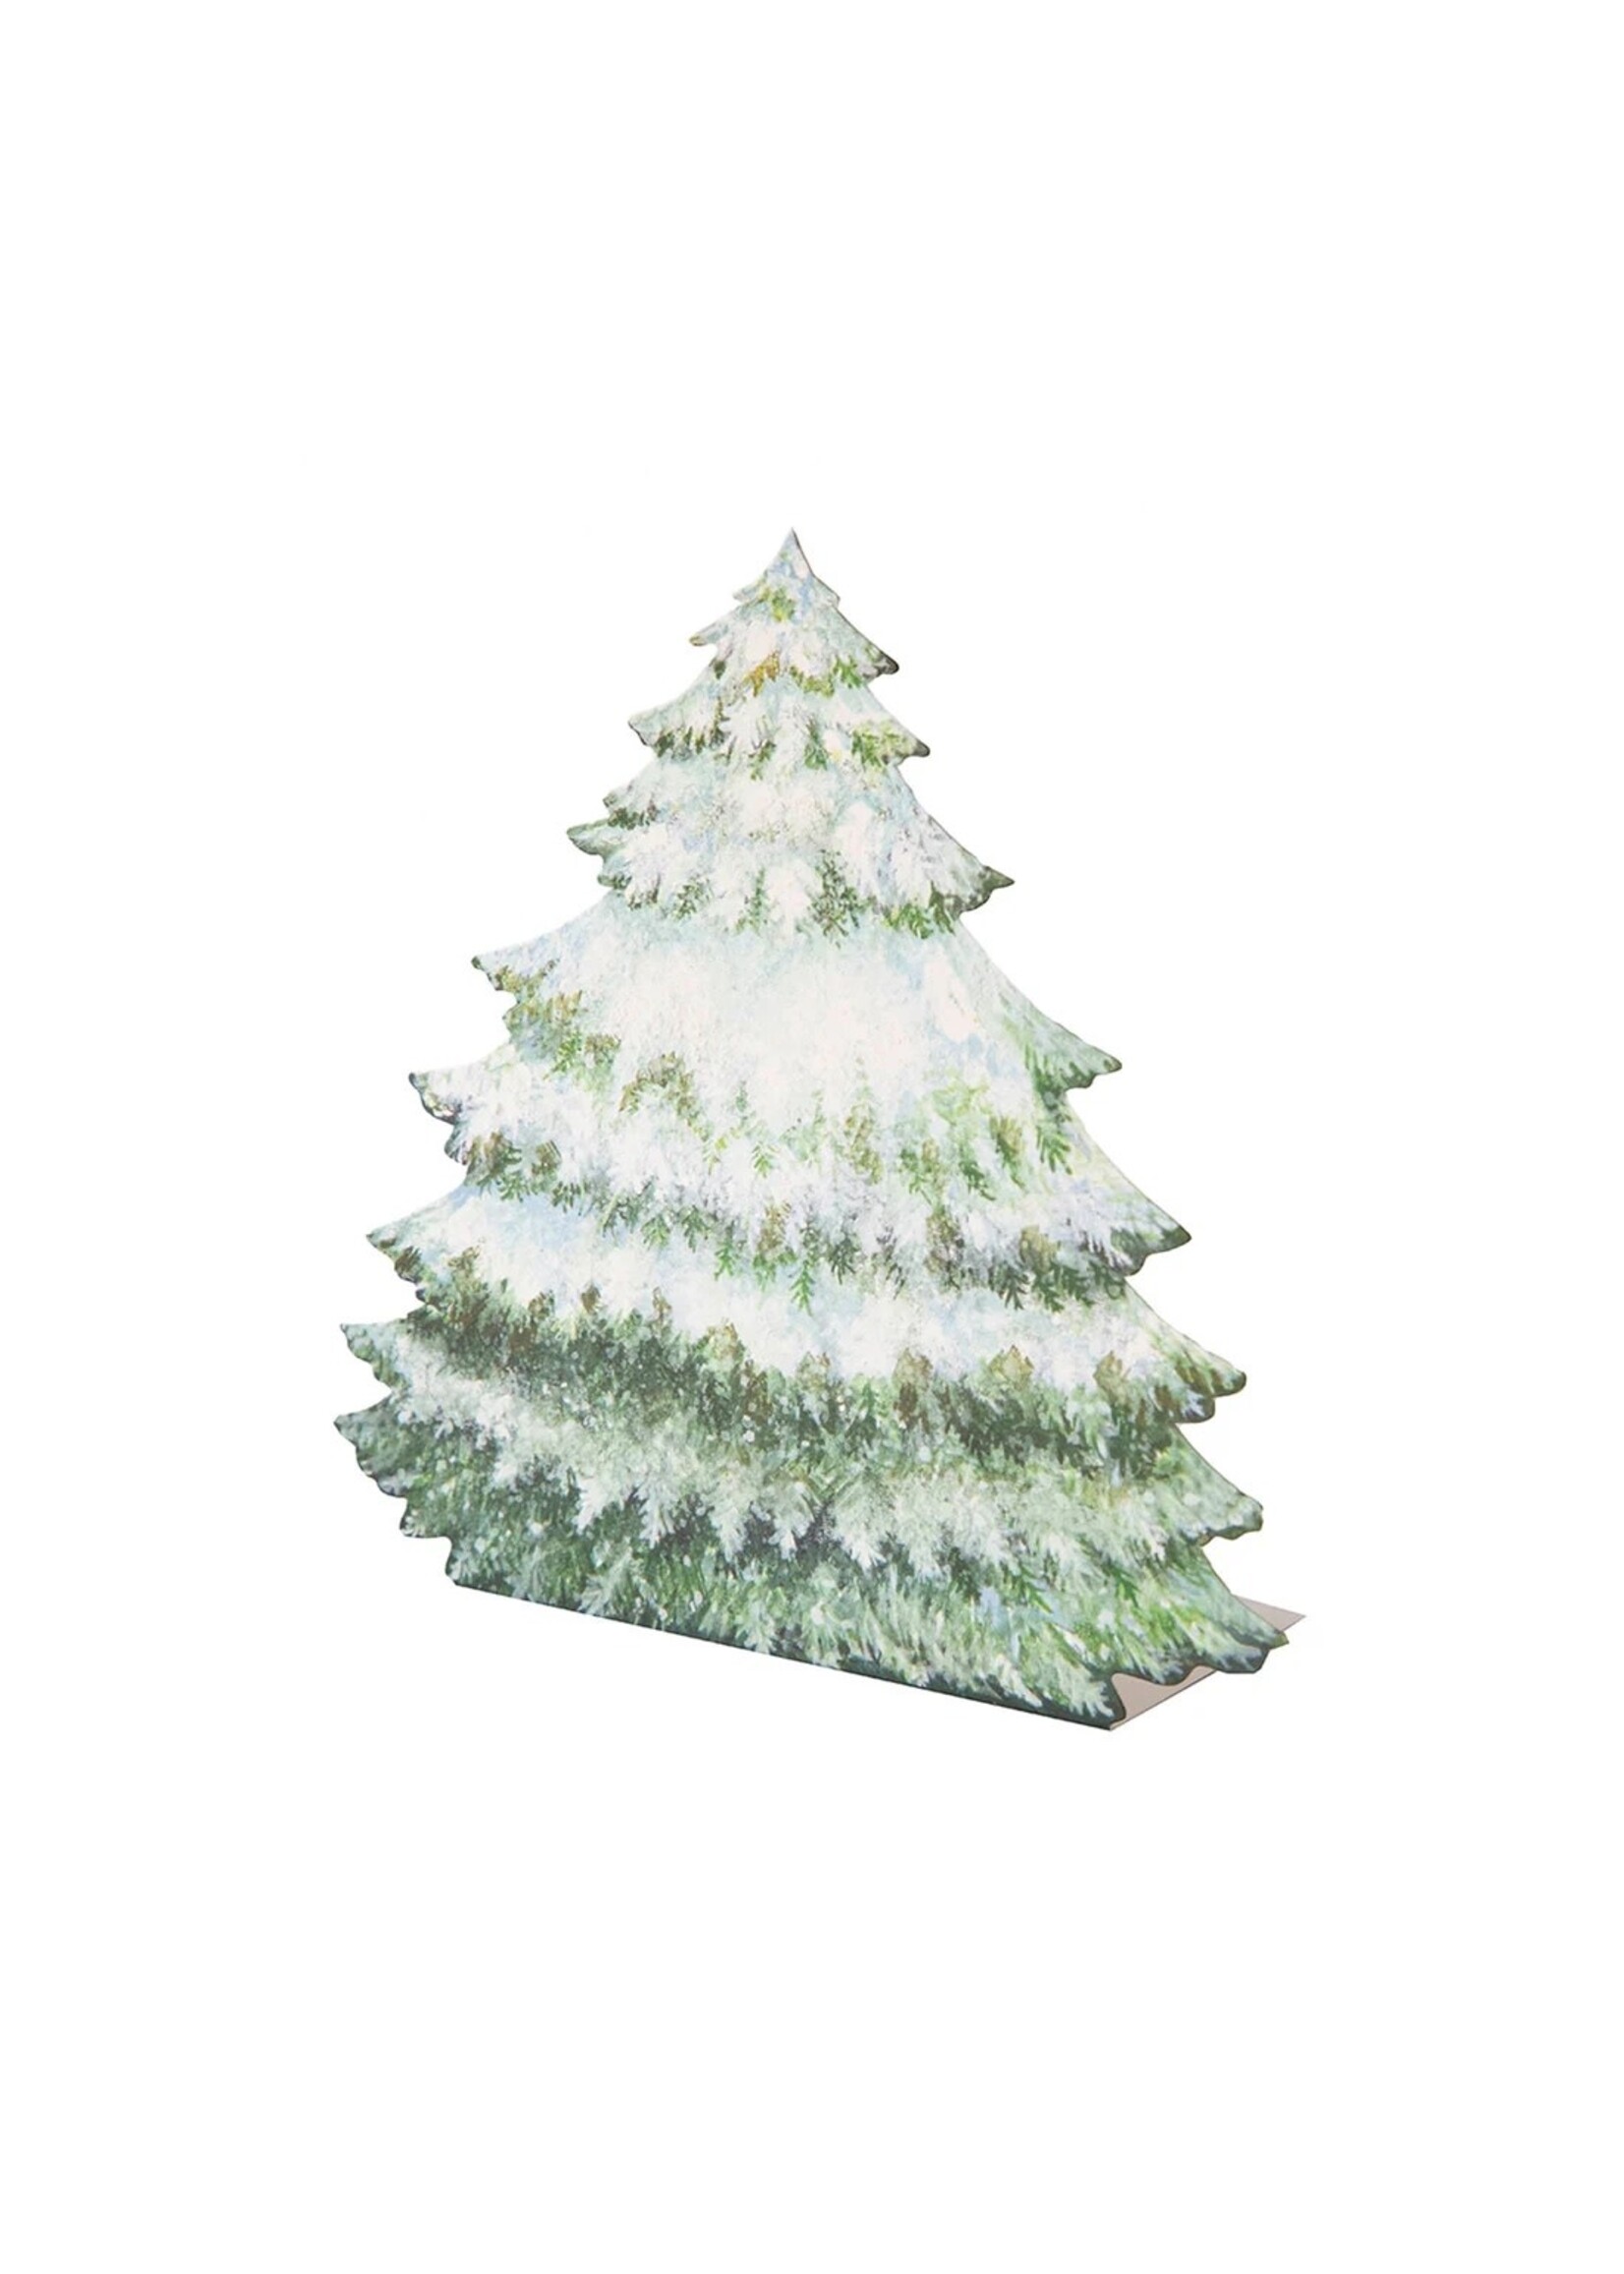 Hester & Cook Place Cards - Evergreen (pack of 12)